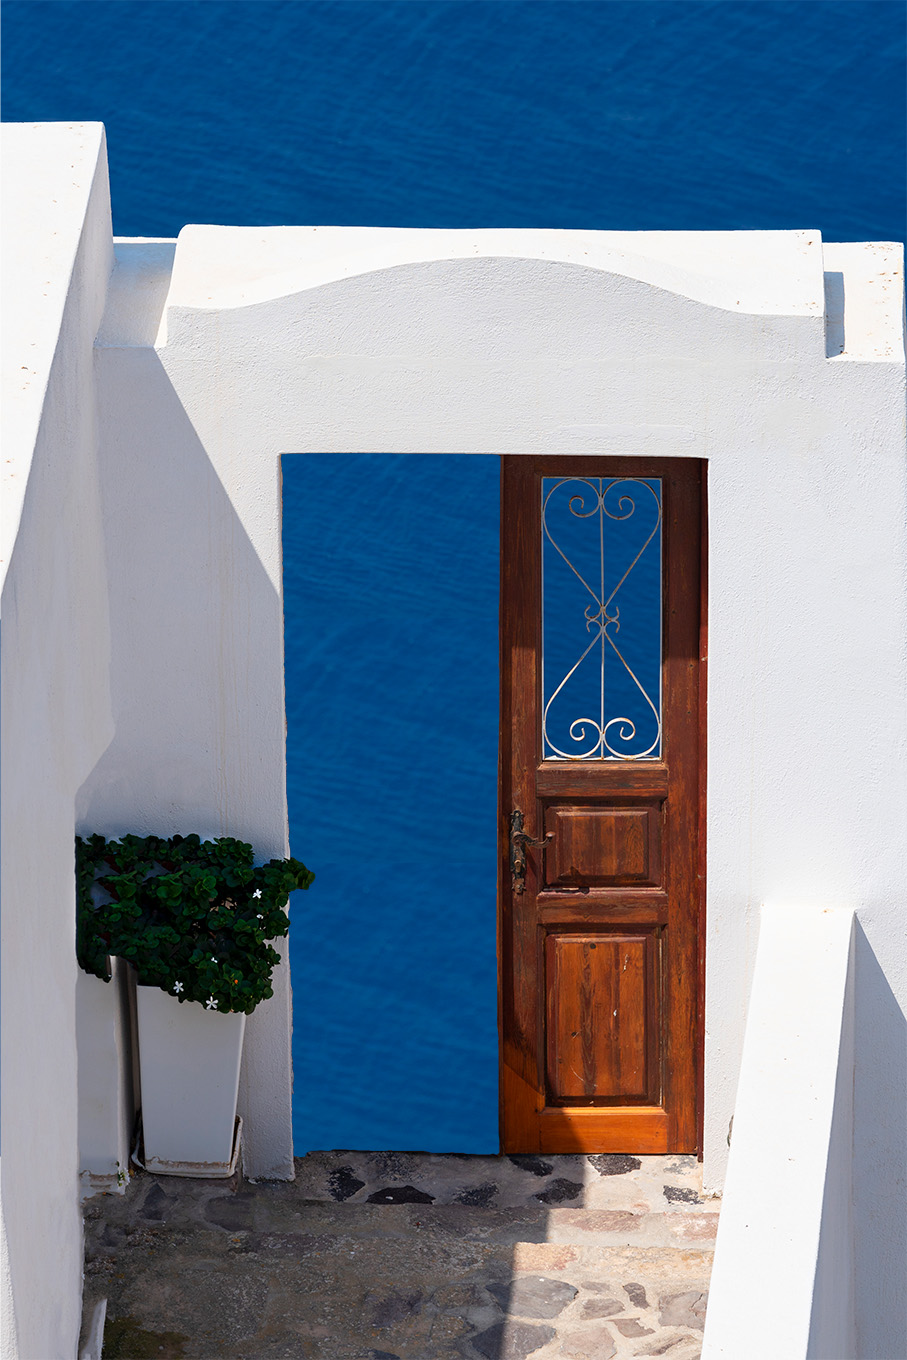 This is a photo of an open wooden door that leads to water in Greece that represents the positive affects.